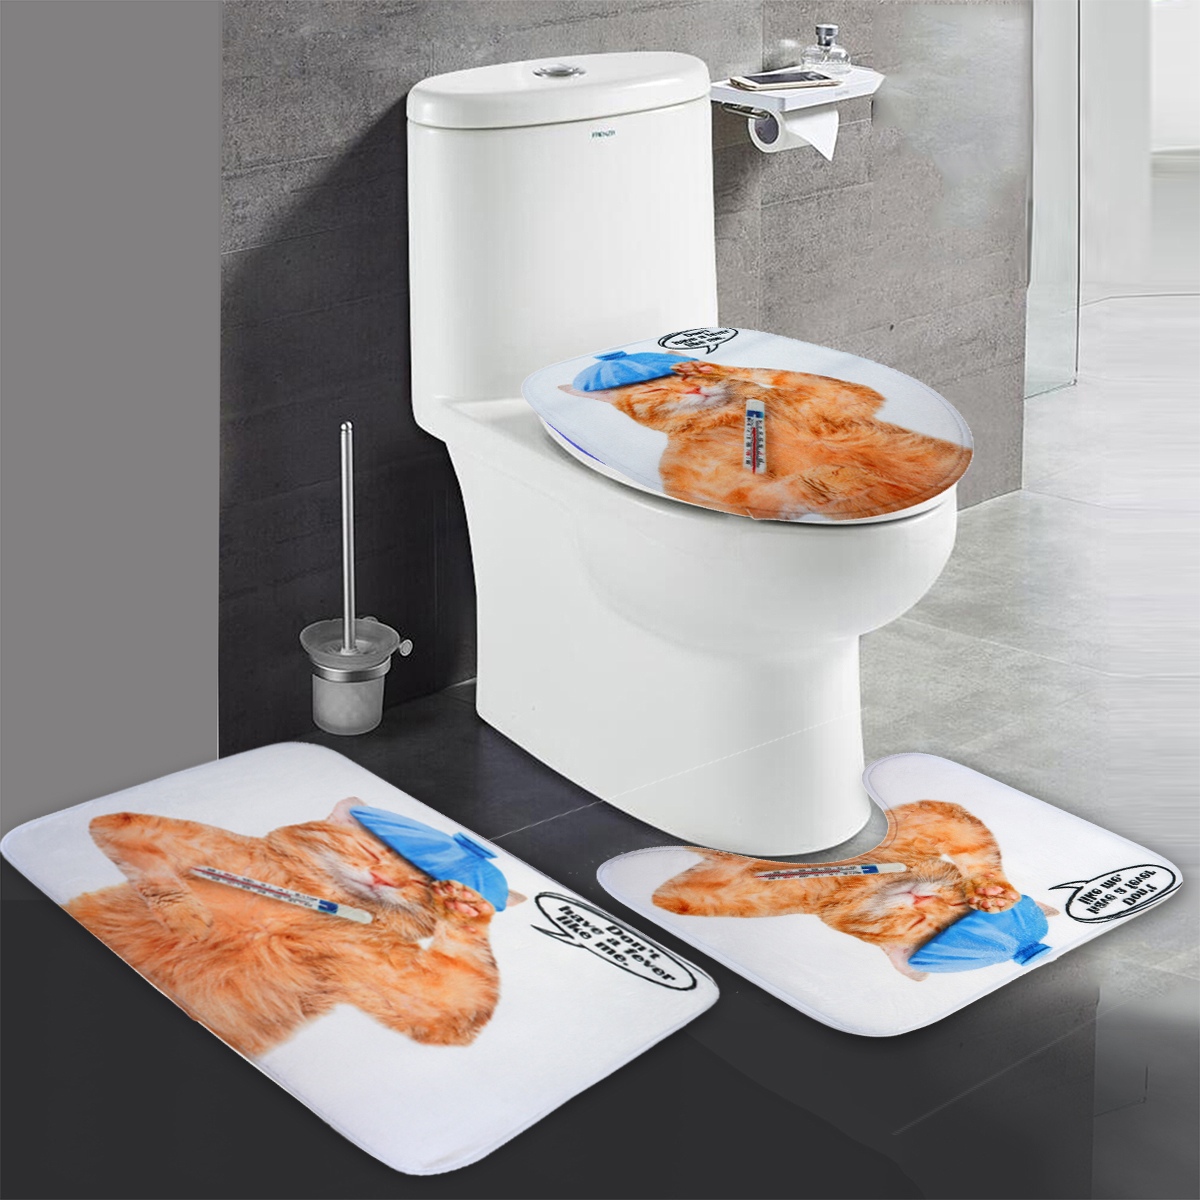 Toilet-Seat-Covers-Bathroom-Non-Slip-Thermometer-Fat-Cat-Pedestal-Rugs-Lid-Toilet-Covers-Bath-Mats-1411646-3